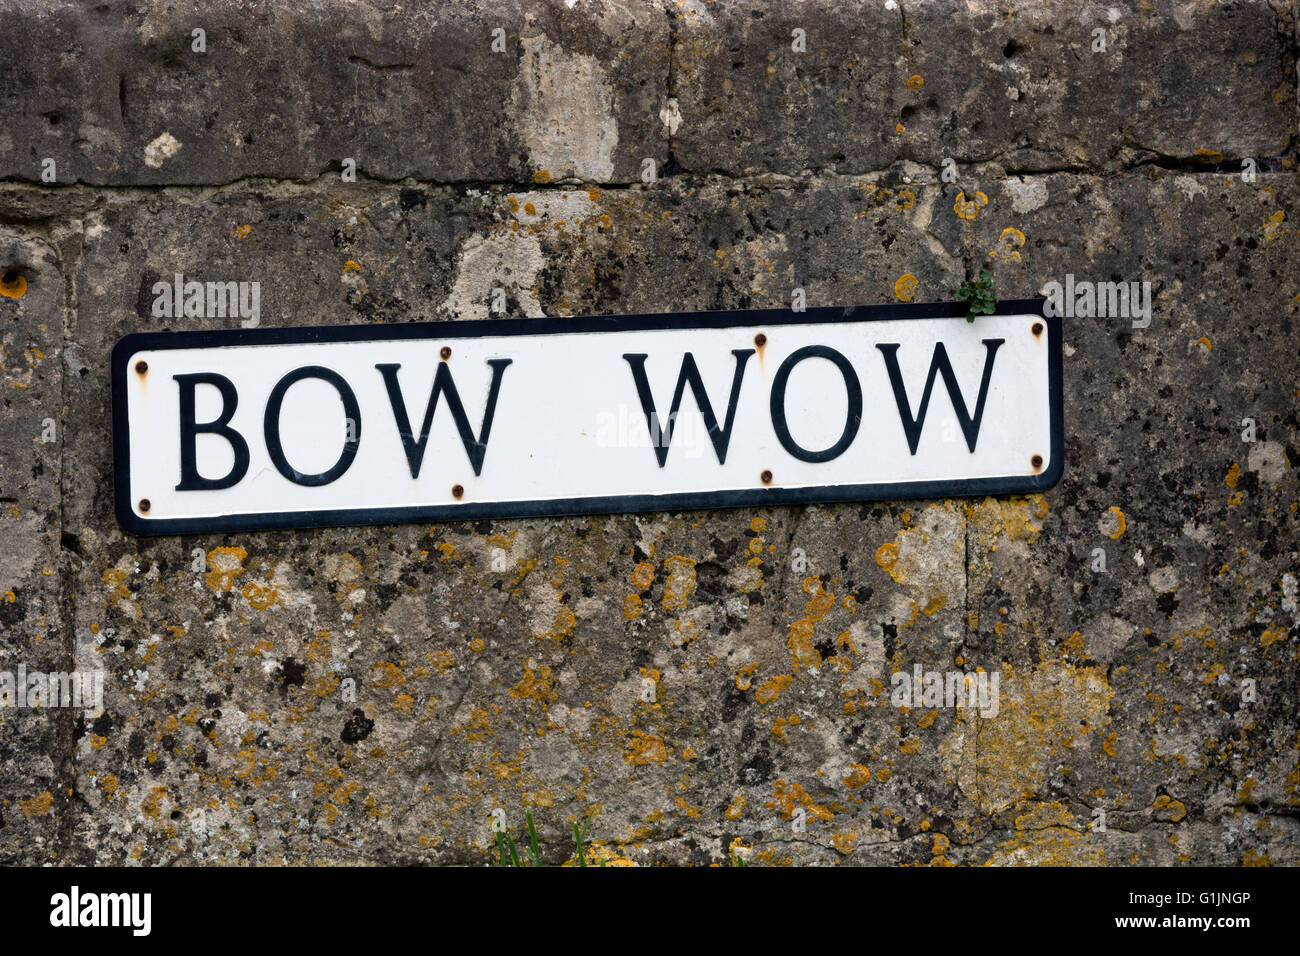 Bow Wow street sign, South Cerney village, Gloucestershire, England, UK Banque D'Images